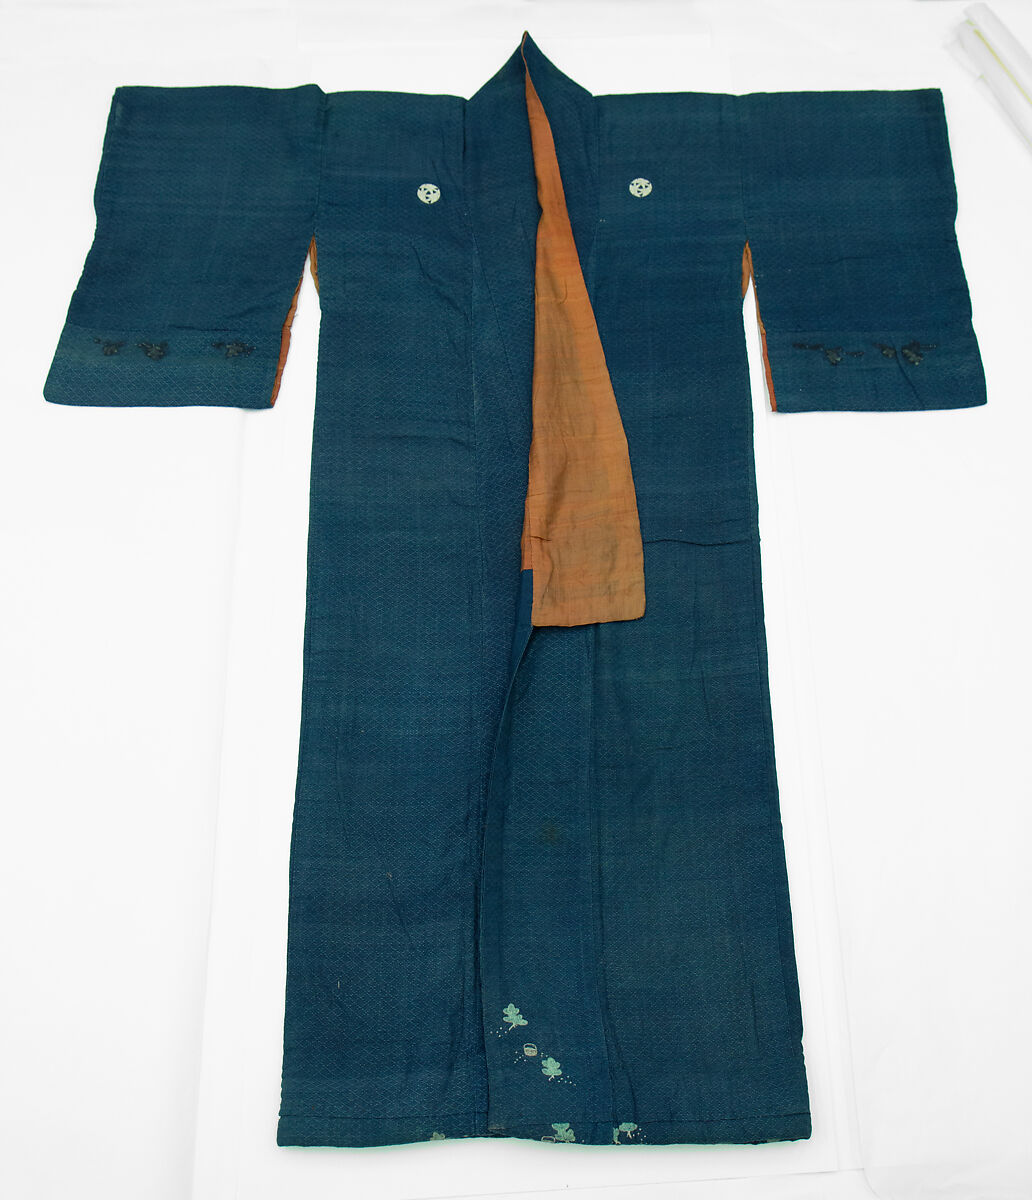 Kosode, Crests, perhaps bamboo, reserved in white., Japan 